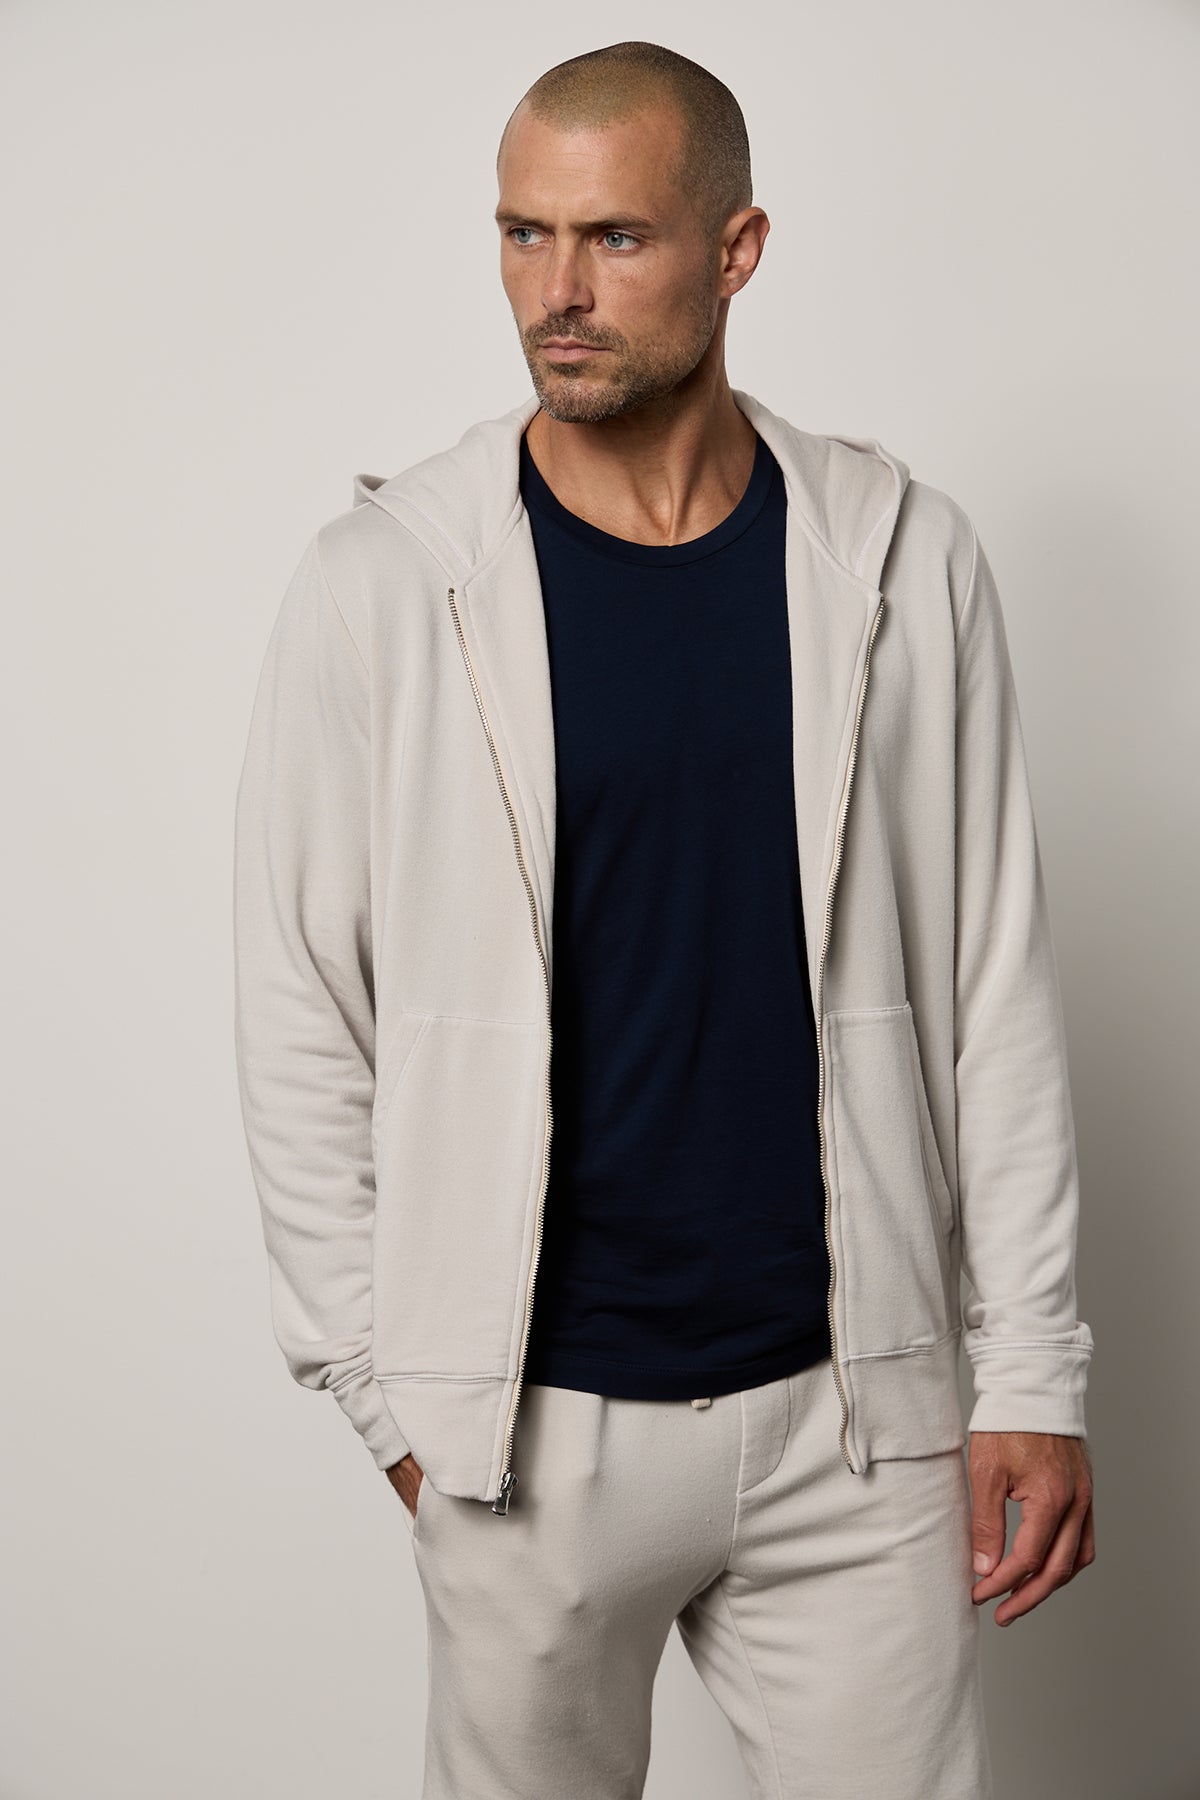 A Velvet by Graham & Spencer Rodan Luxe Fleece Zip Hoodie-wearing man, effortlessly rocks a casual gym-class inspired look with matching pants.-26632051687617